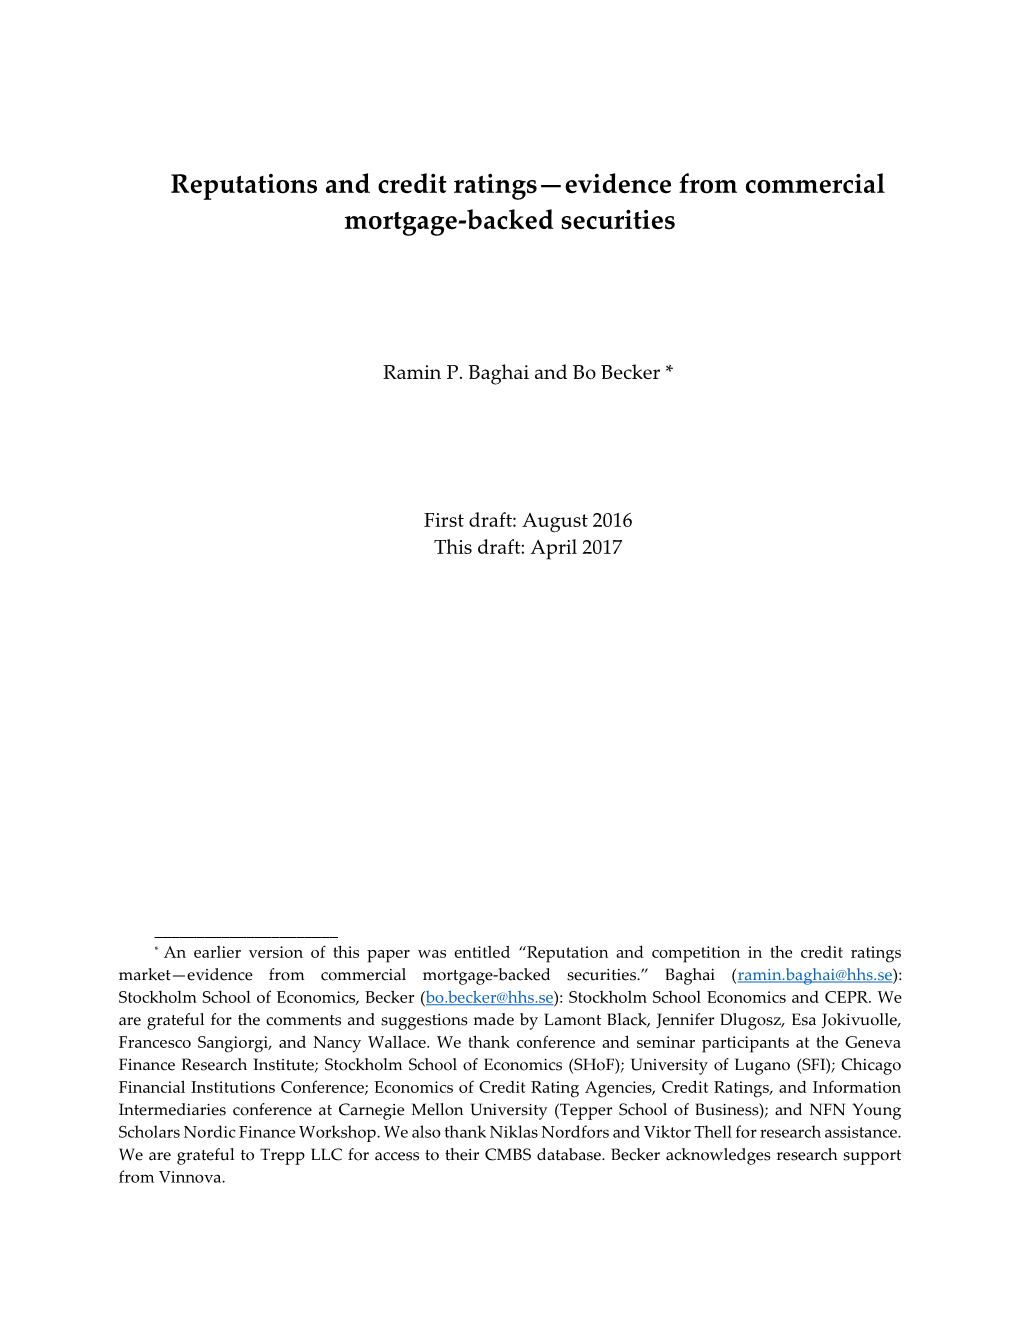 Reputations and Credit Ratings—Evidence from Commercial Mortgage-Backed Securities